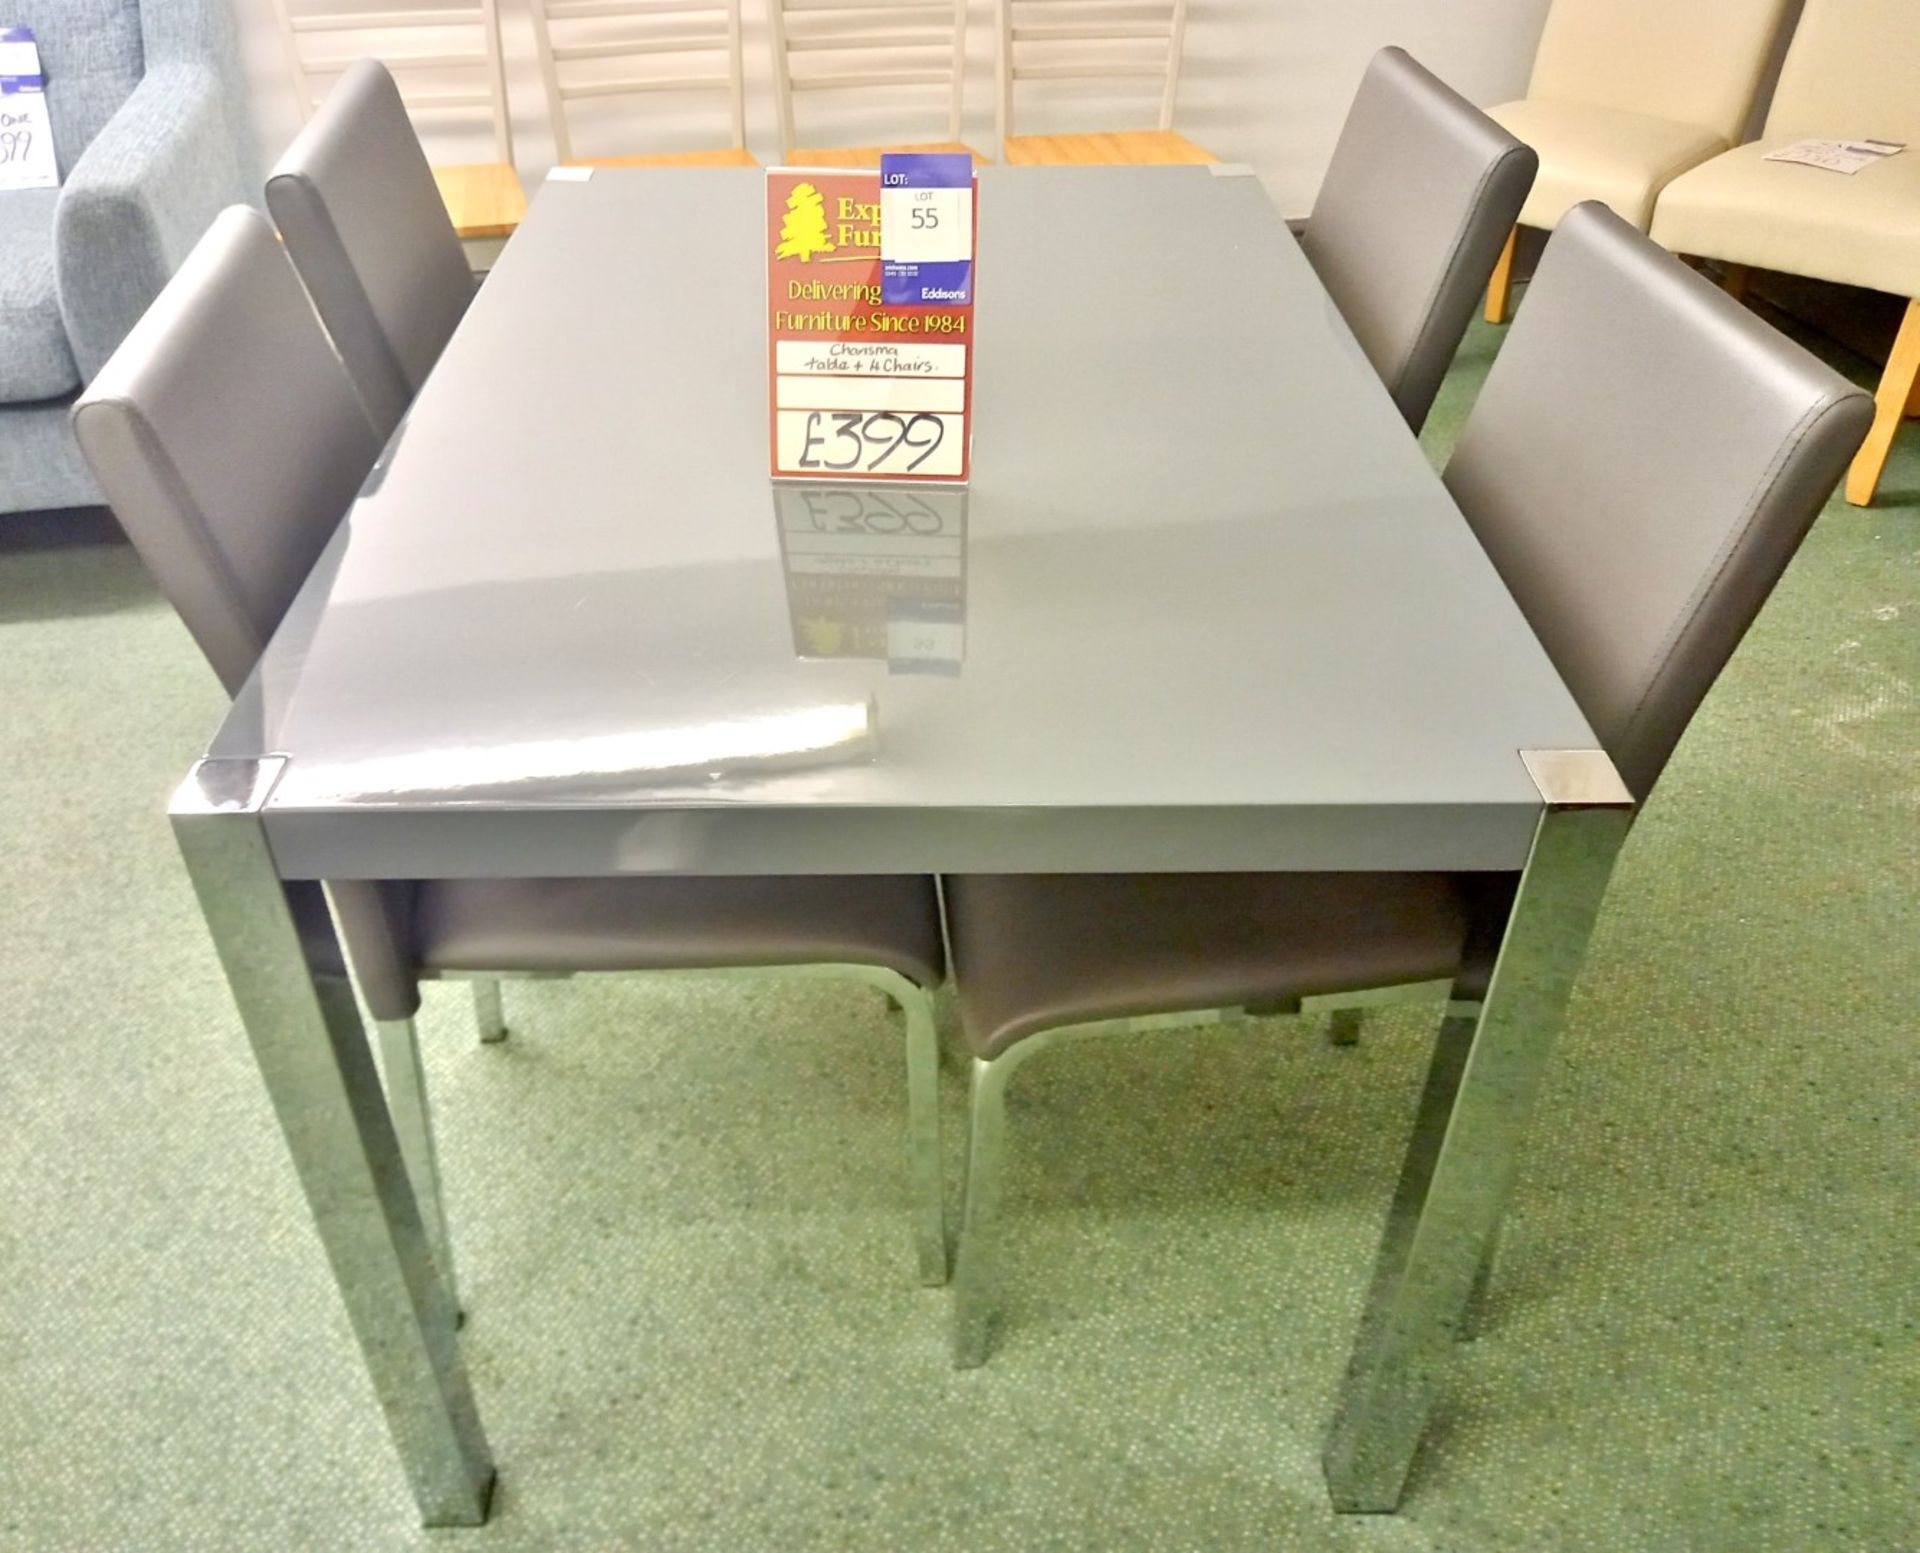 Charisma Table & 4 Chairs (1200 x 800) Rrp. £399 - Image 4 of 5